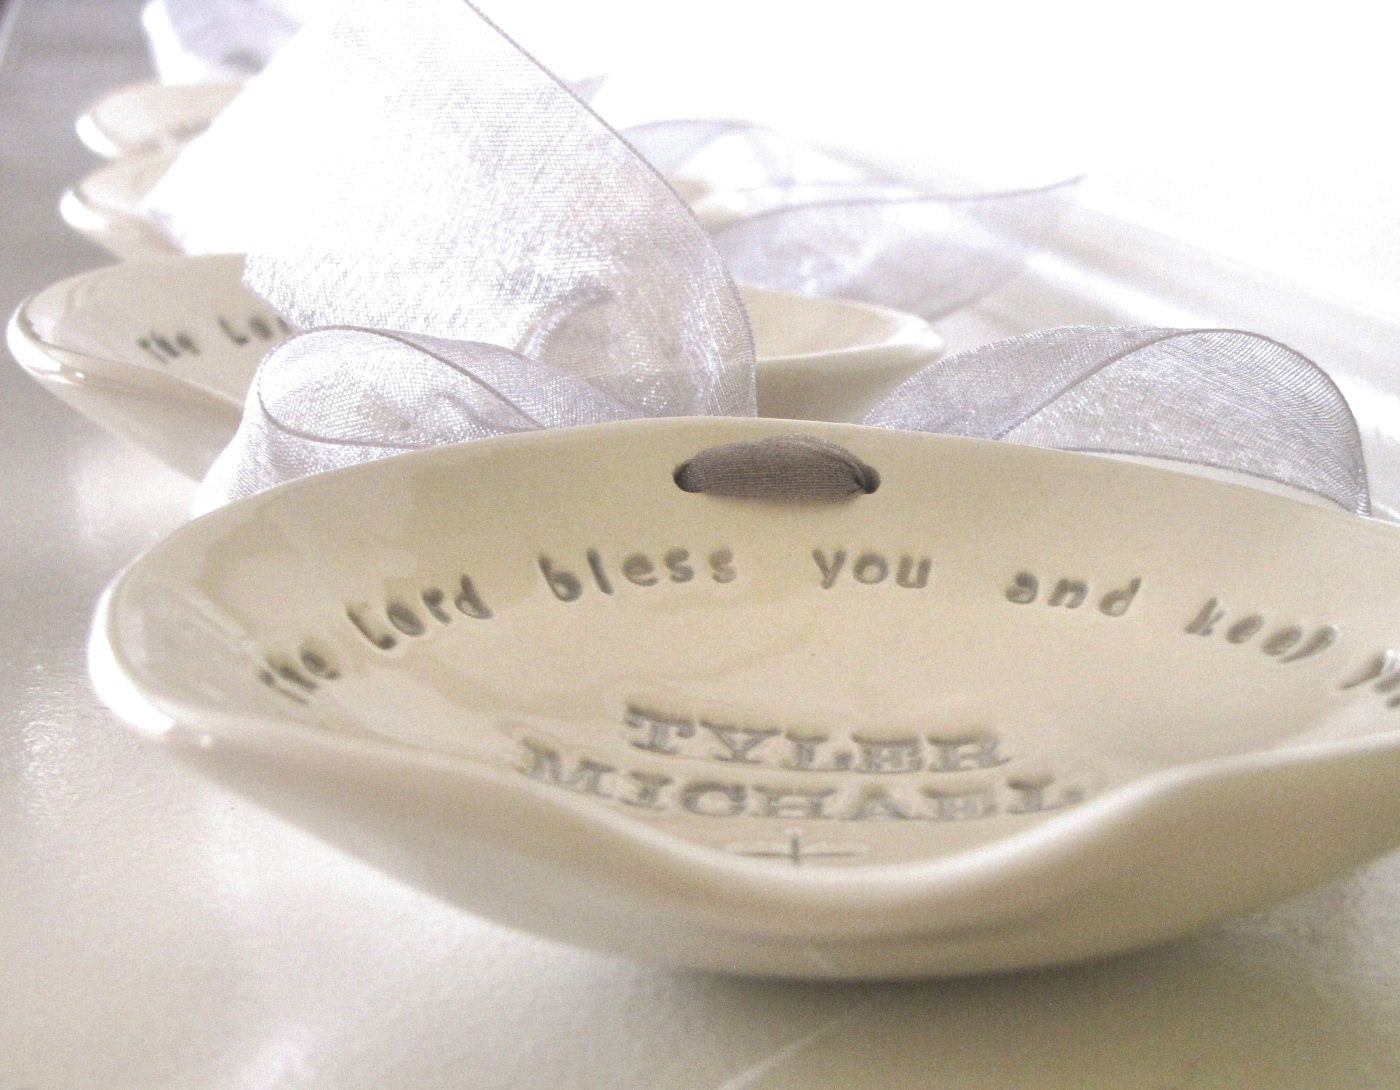 Christening Gift Ideas For Baby Boy
 Which Baptism Gifts For Boys Are Appropriate